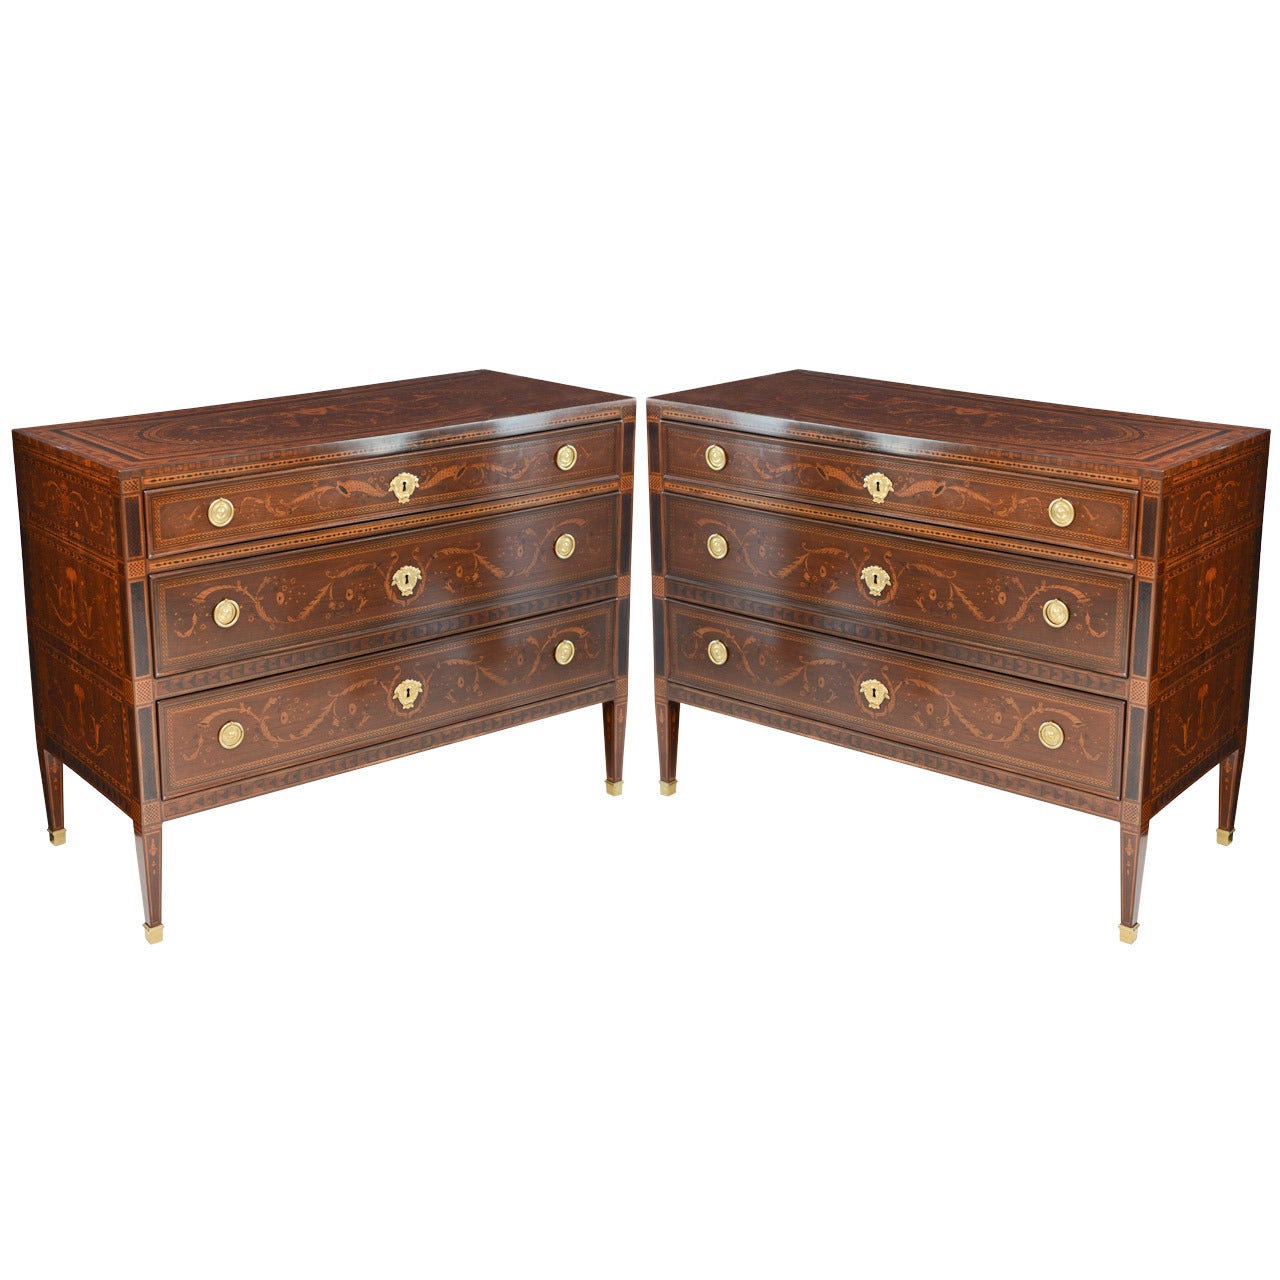 Fine Pair of Italian Neoclassic Marquetry and Parquetry Inlaid Commodes For Sale